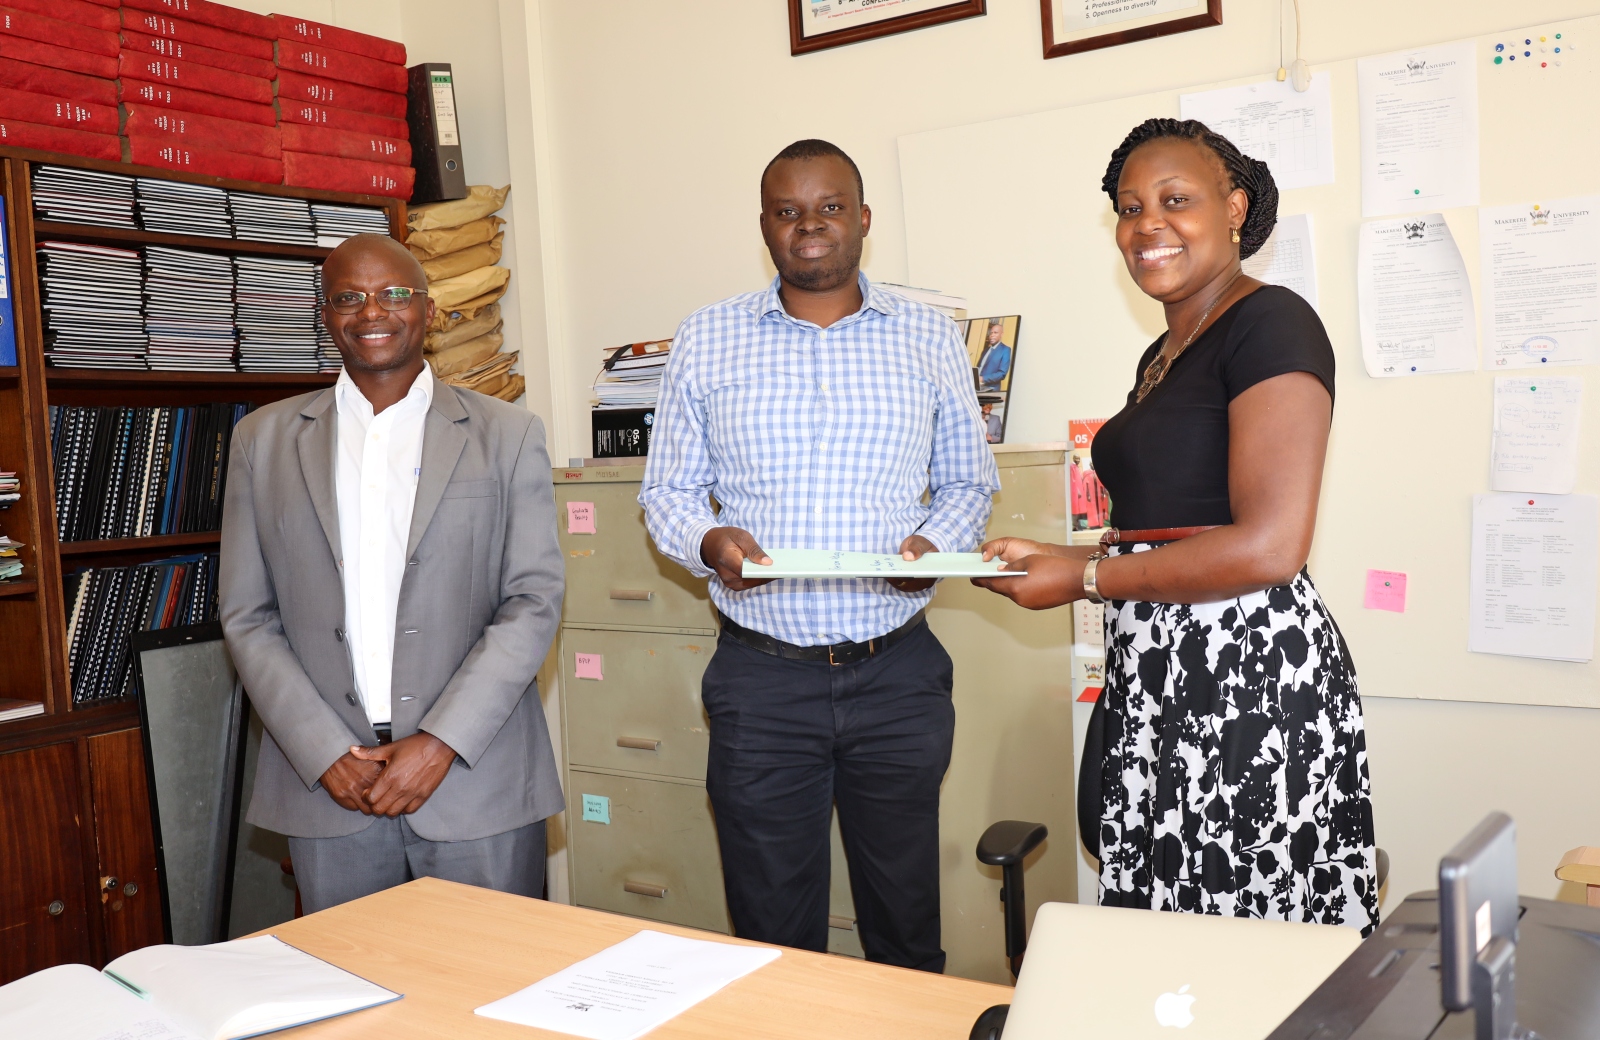 The Dean School of Statistics and Planning (SSP) Dr. James Wokadala (L) witnesses as outgoing Head of the Department of Population Studies, Dr. Stephen Ojiambo Wandera (C) hands over to incoming Head, Dr. Patricia Ndugga on 1st July 2022, CoBAMS, Makerere University.